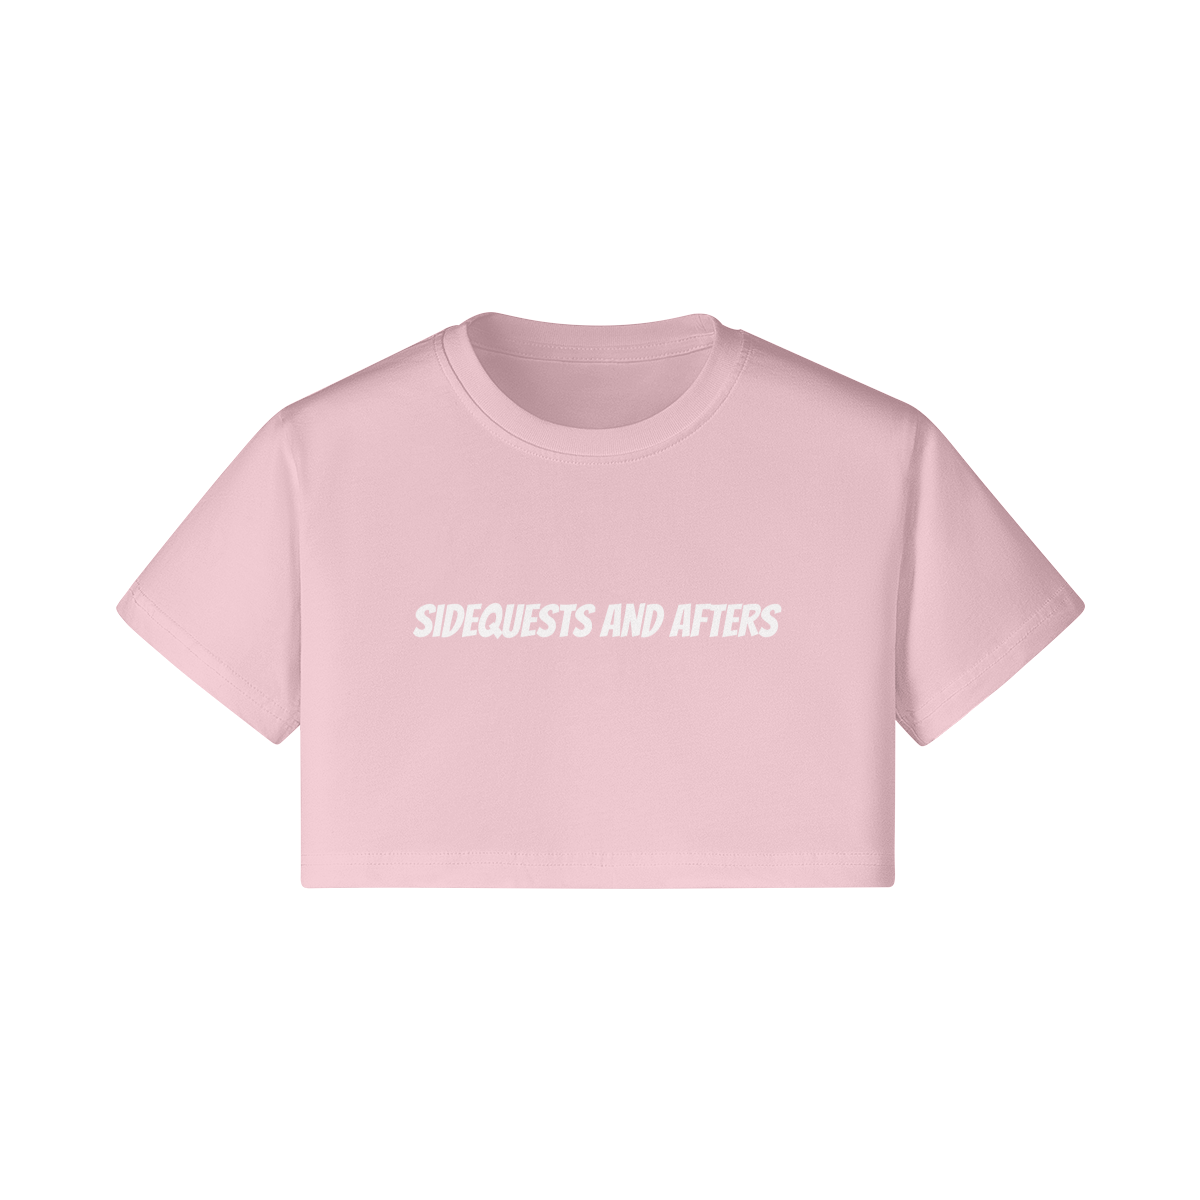 Sidequests And Afters Crop Top - Garden Of EDM